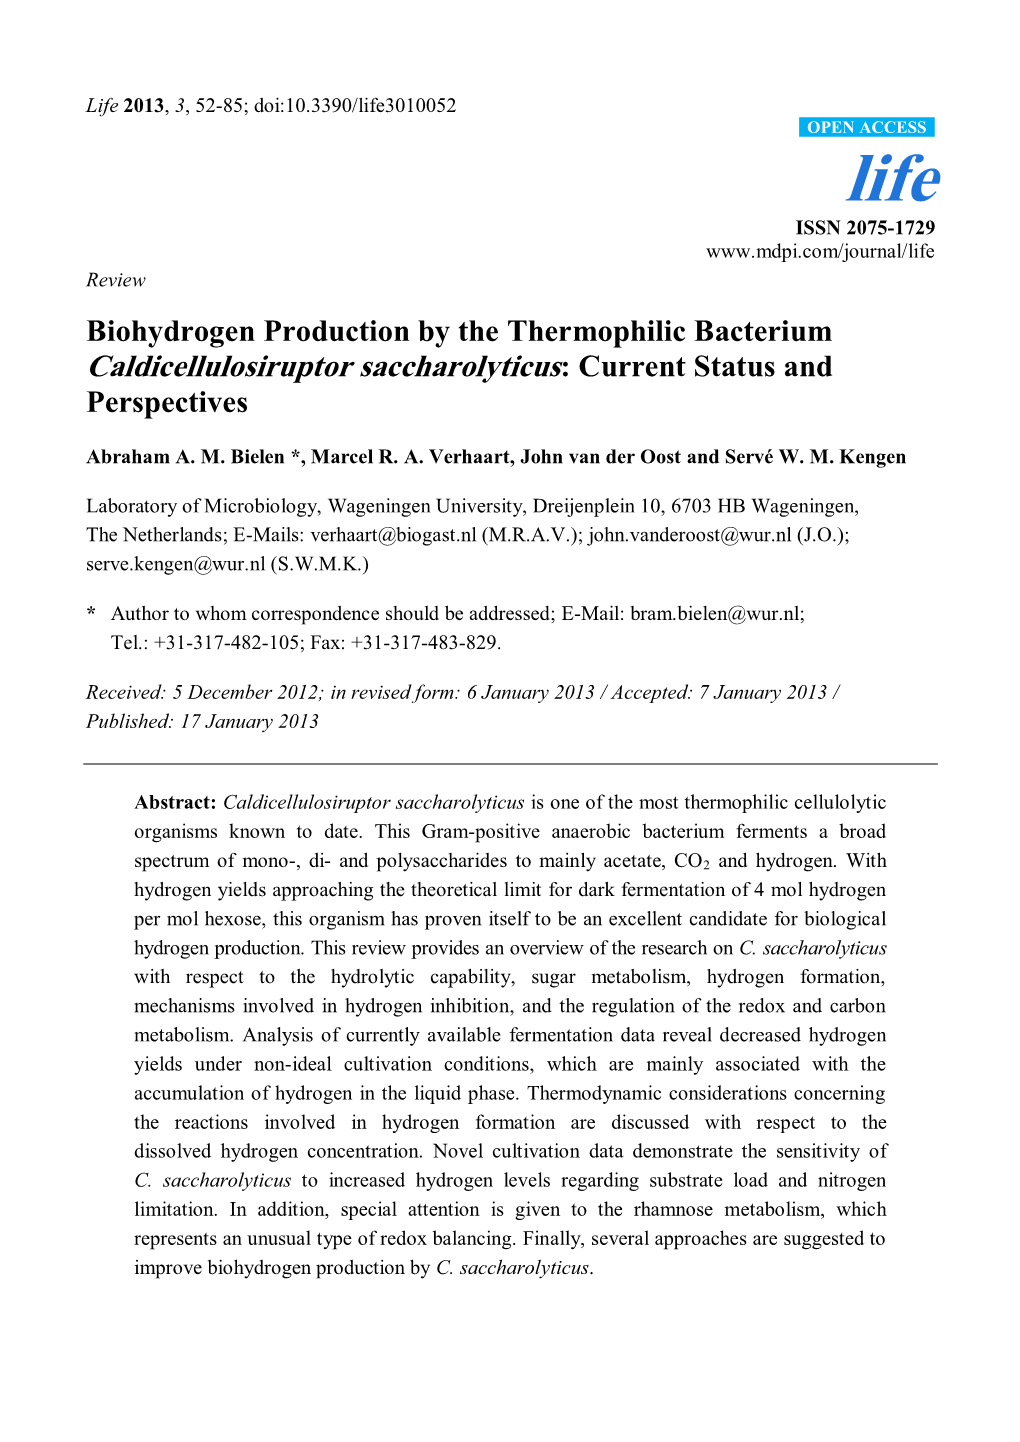 Biohydrogen Production by the Thermophilic Bacterium Caldicellulosiruptor Saccharolyticus: Current Status and Perspectives